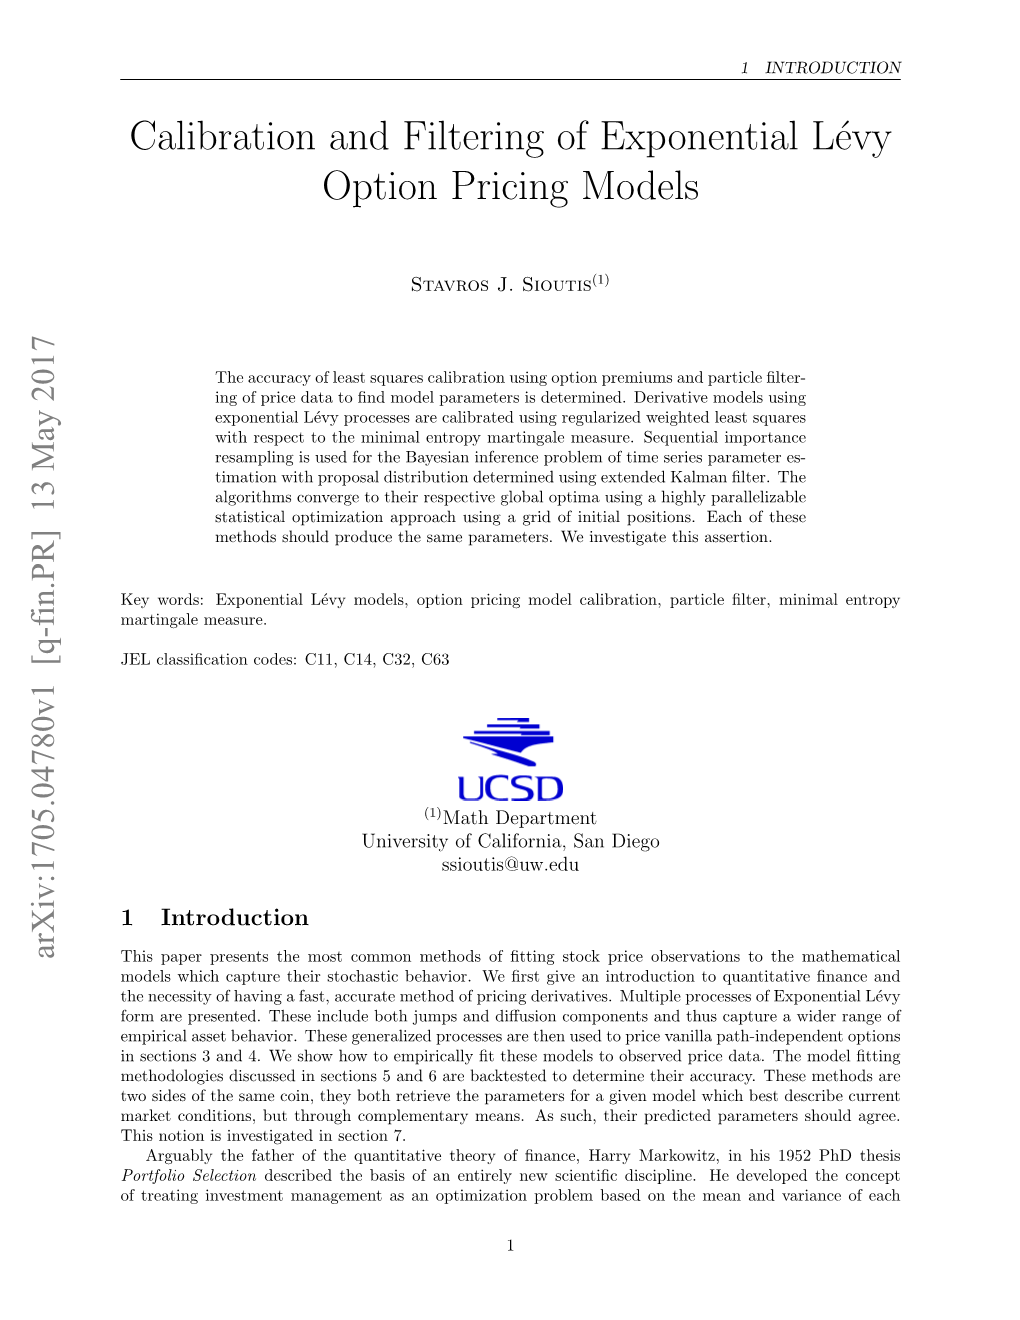 Calibration and Filtering of Exponential Lévy Option Pricing